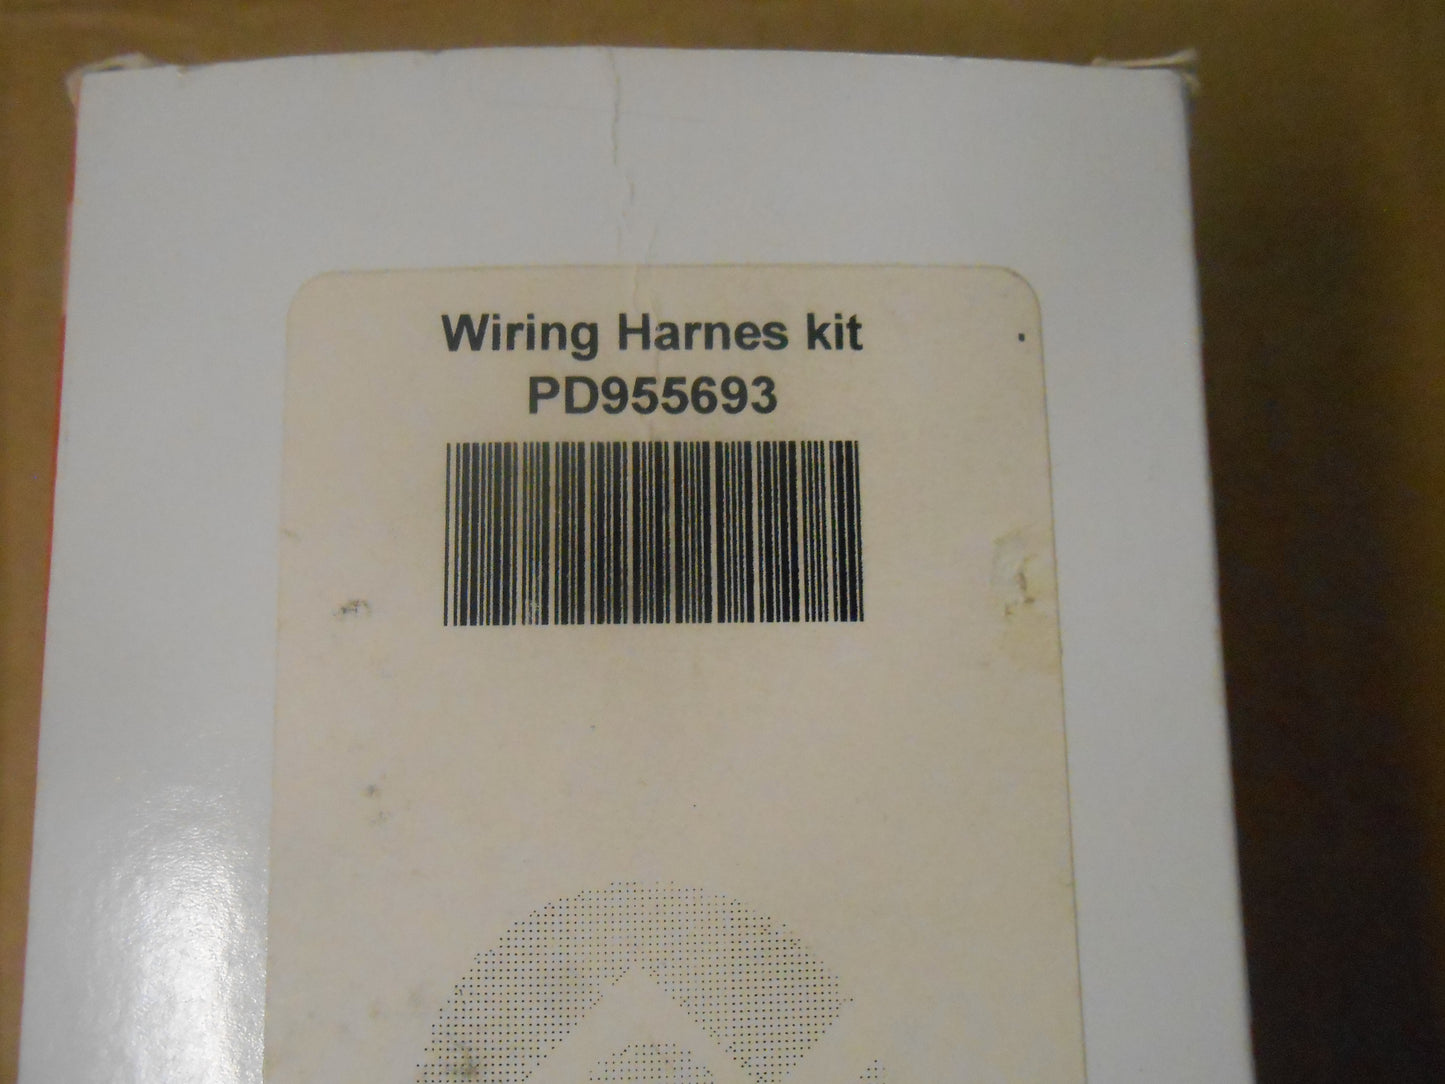 WIRE HARNESS KIT